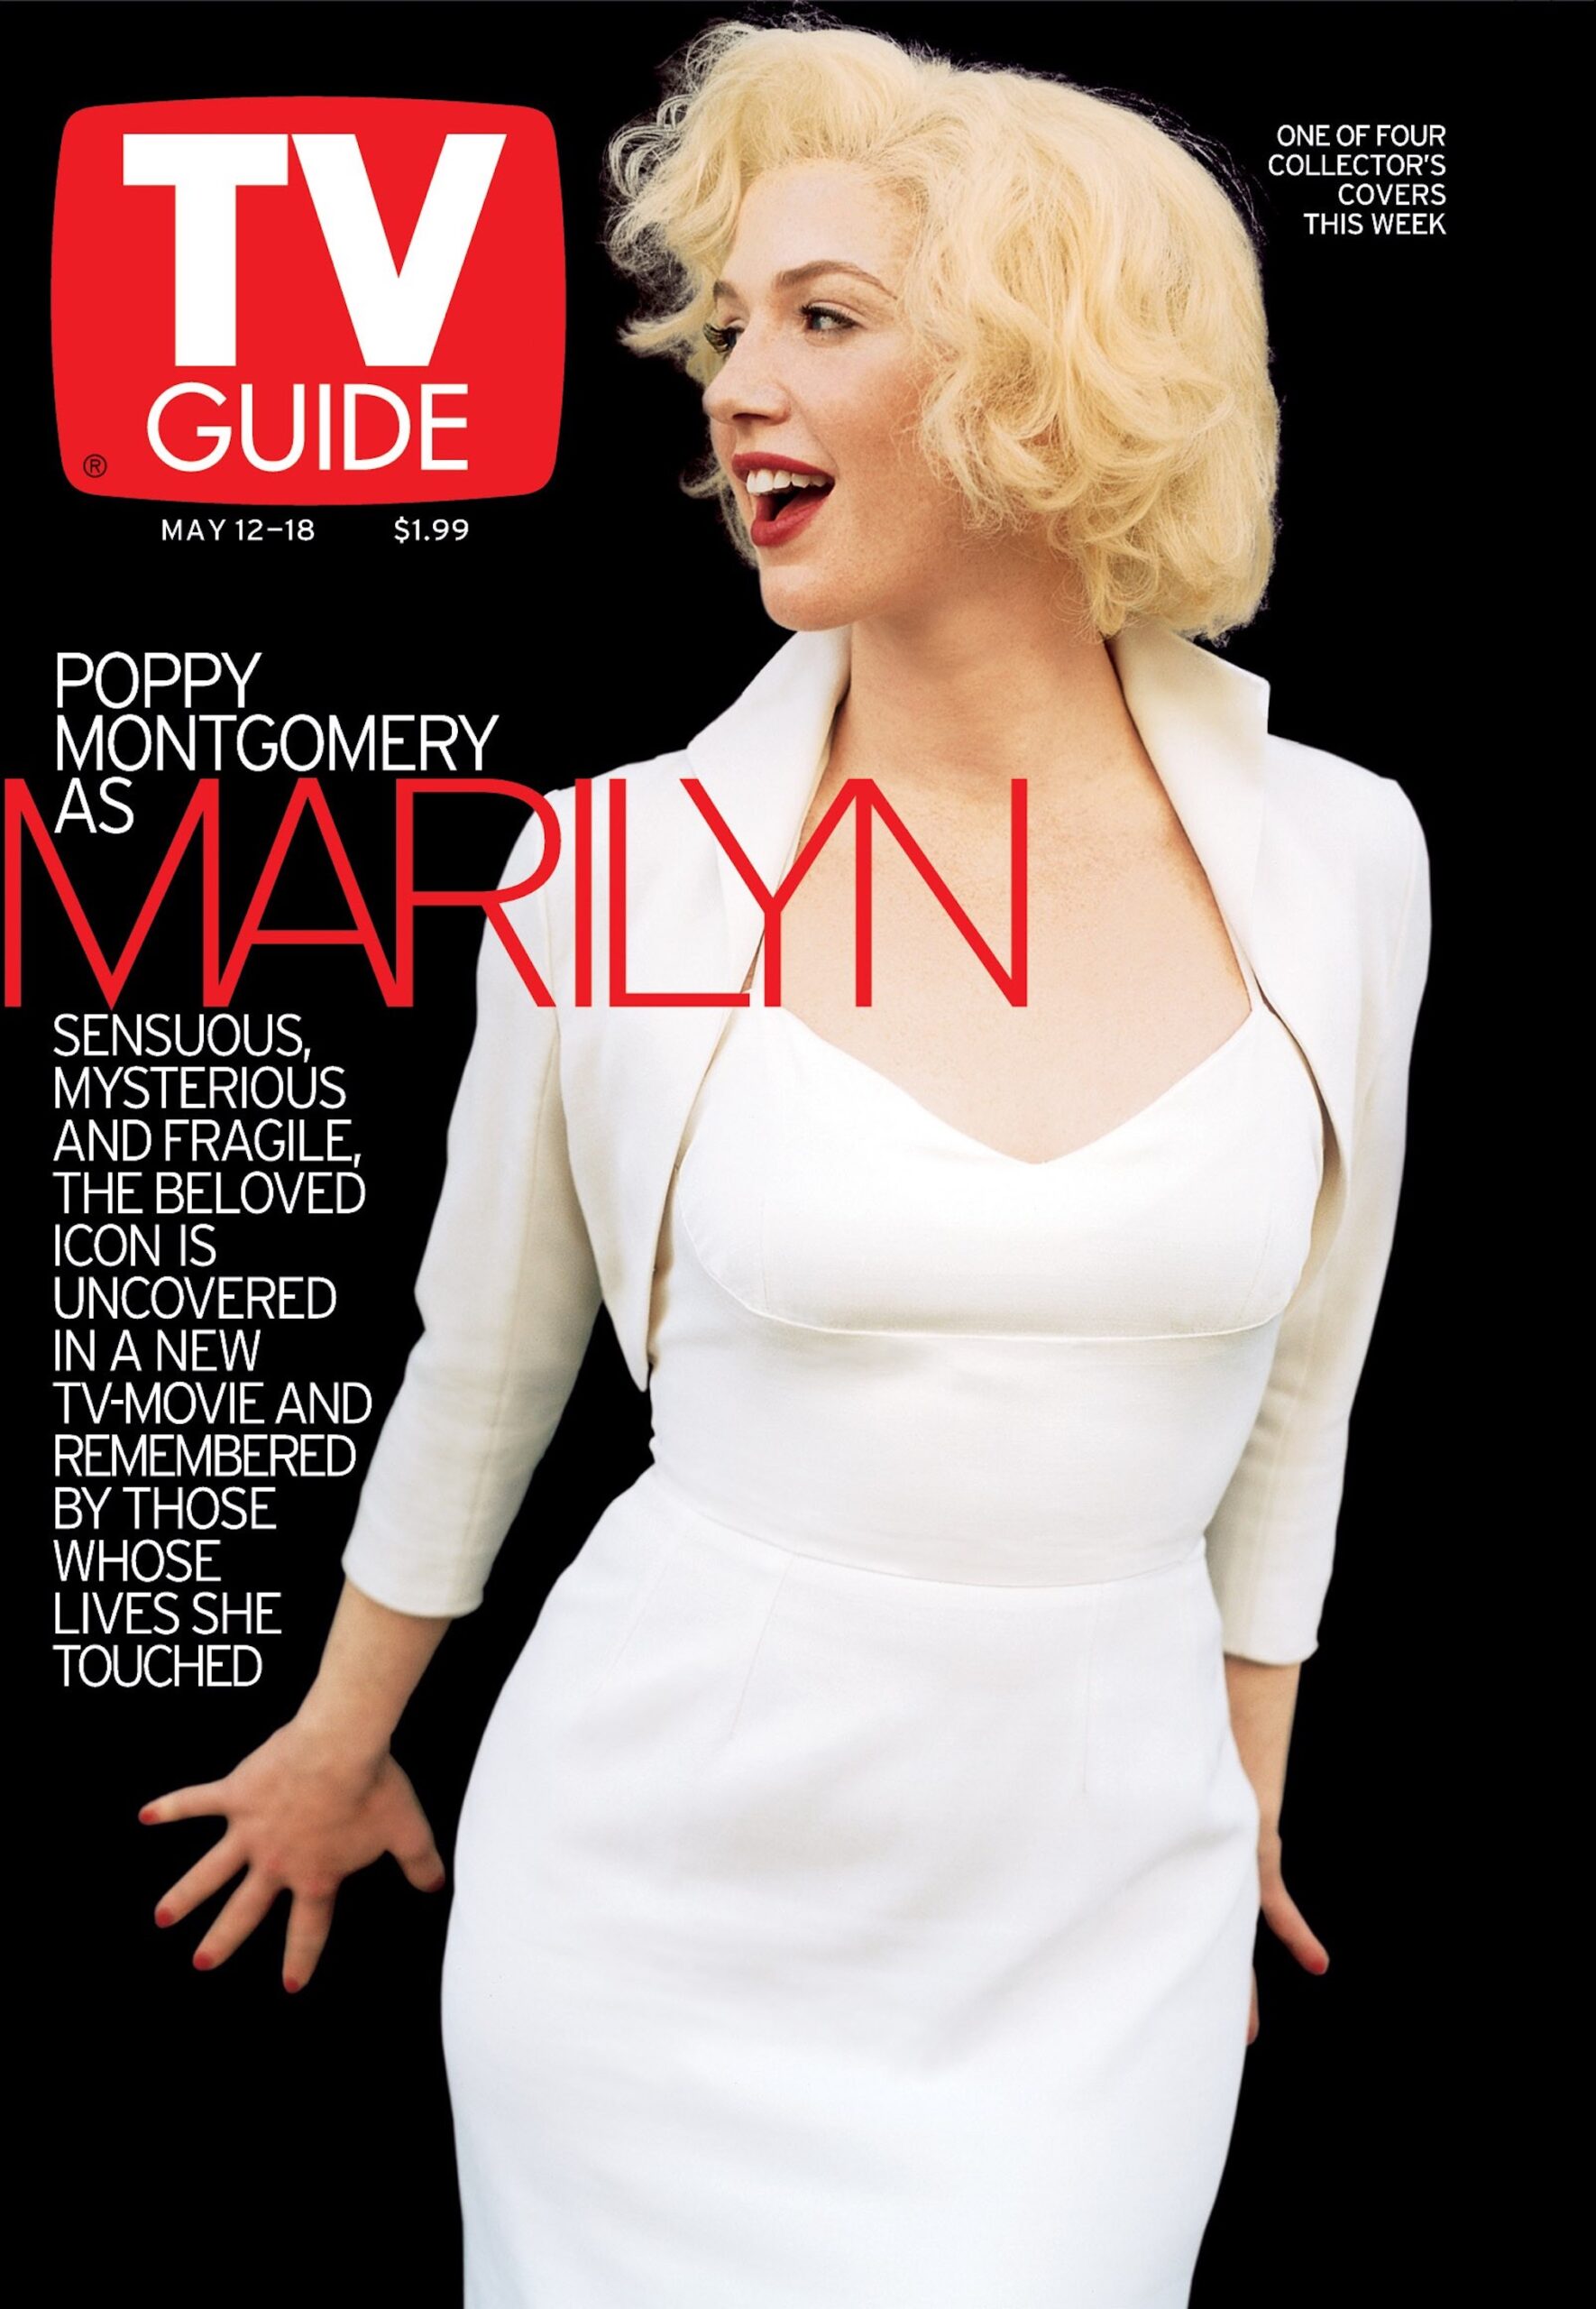 Poppy Montgomery in character as Marilyn Monroe on the cover of TV Guide Magazine